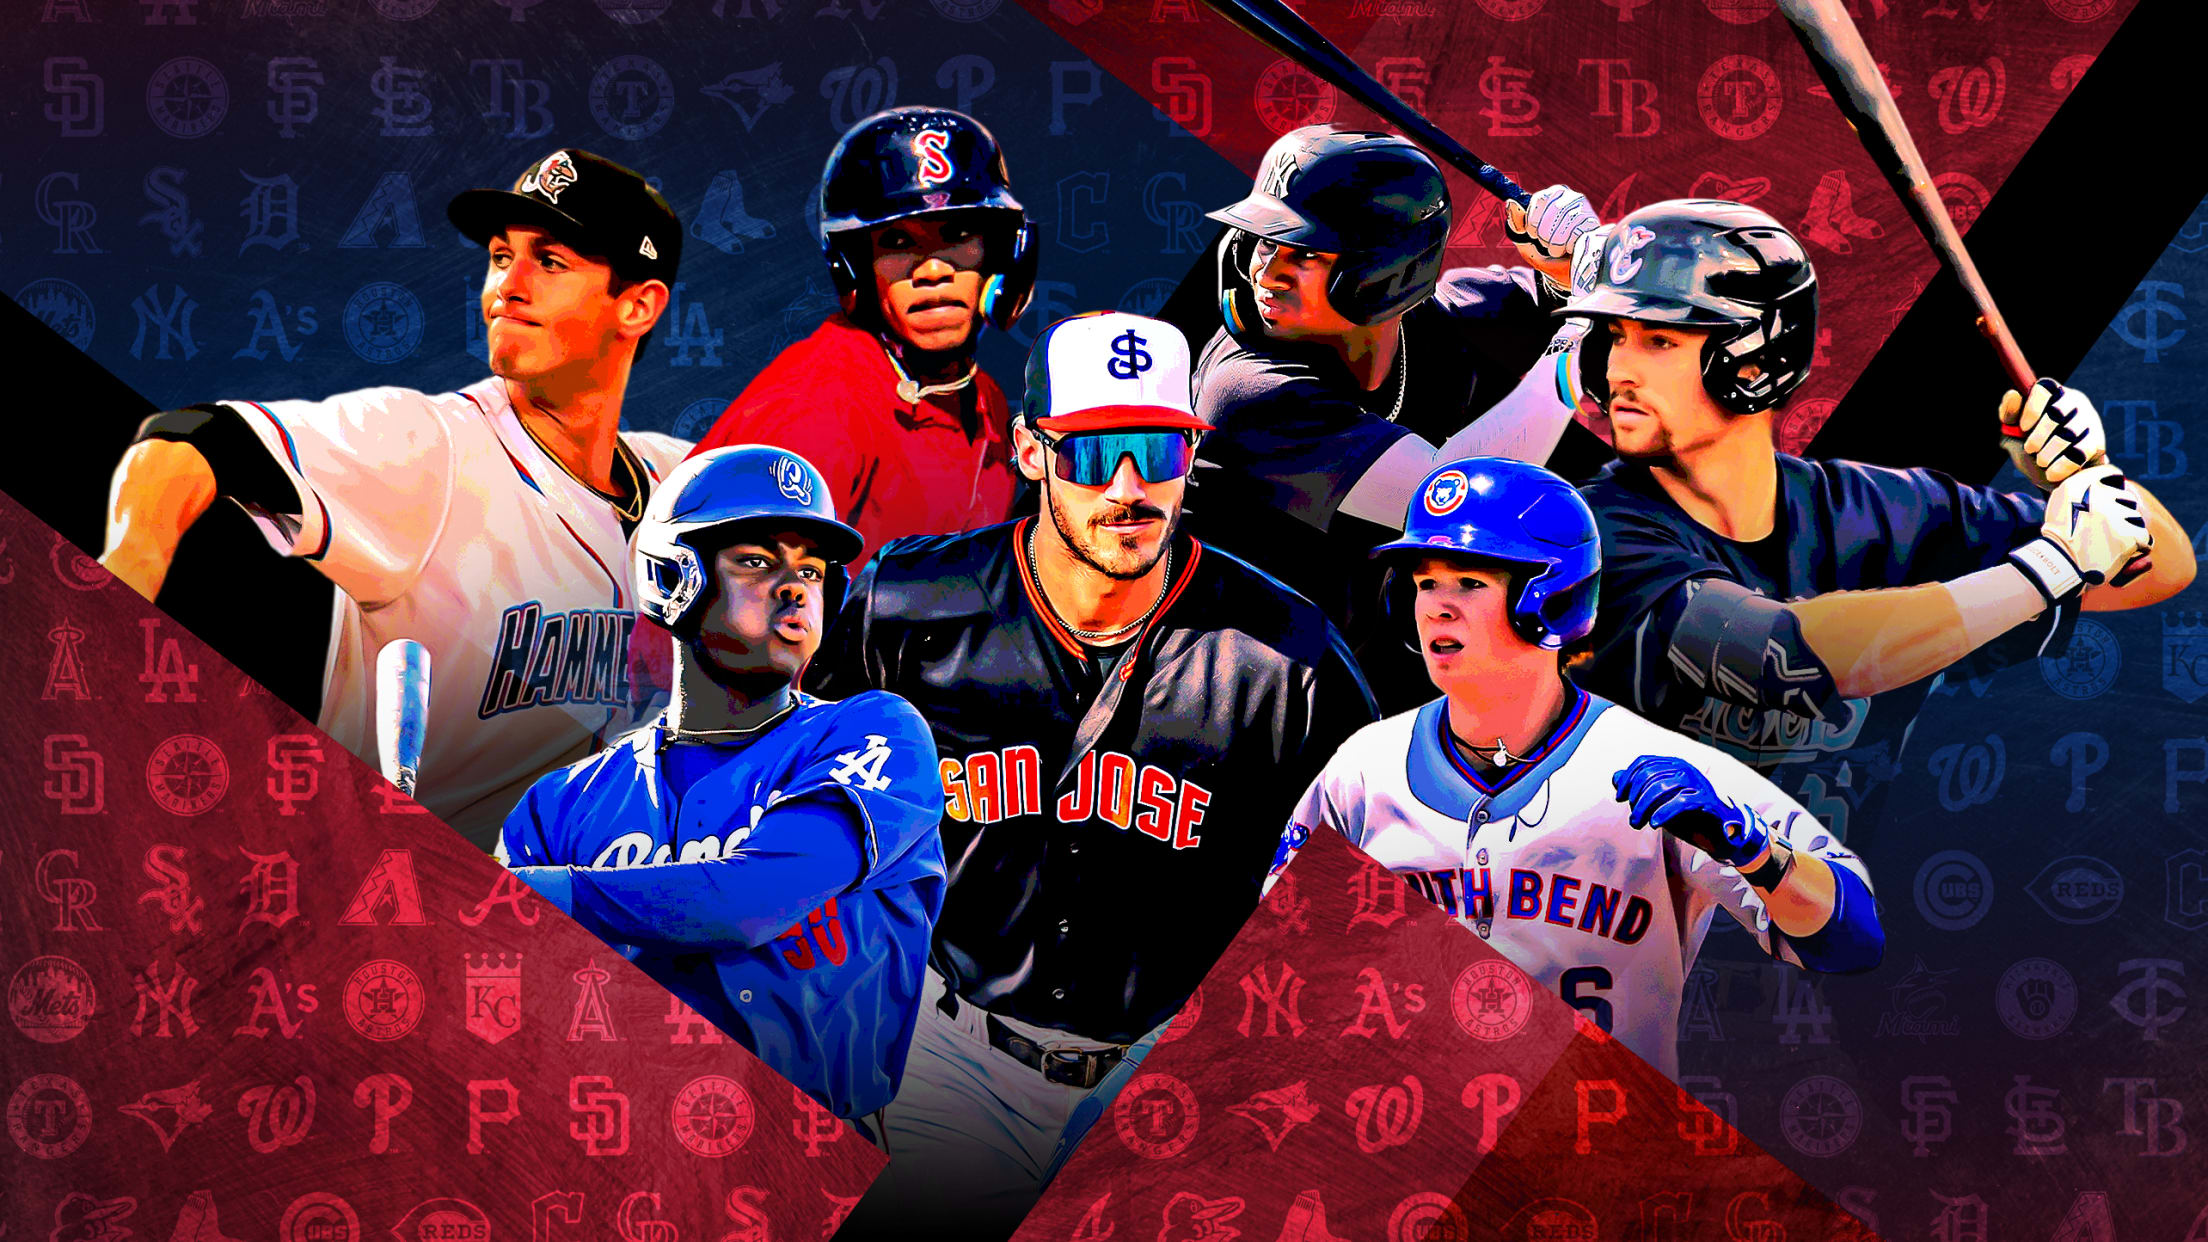 A photo illustration of 7 prospects primed to break out